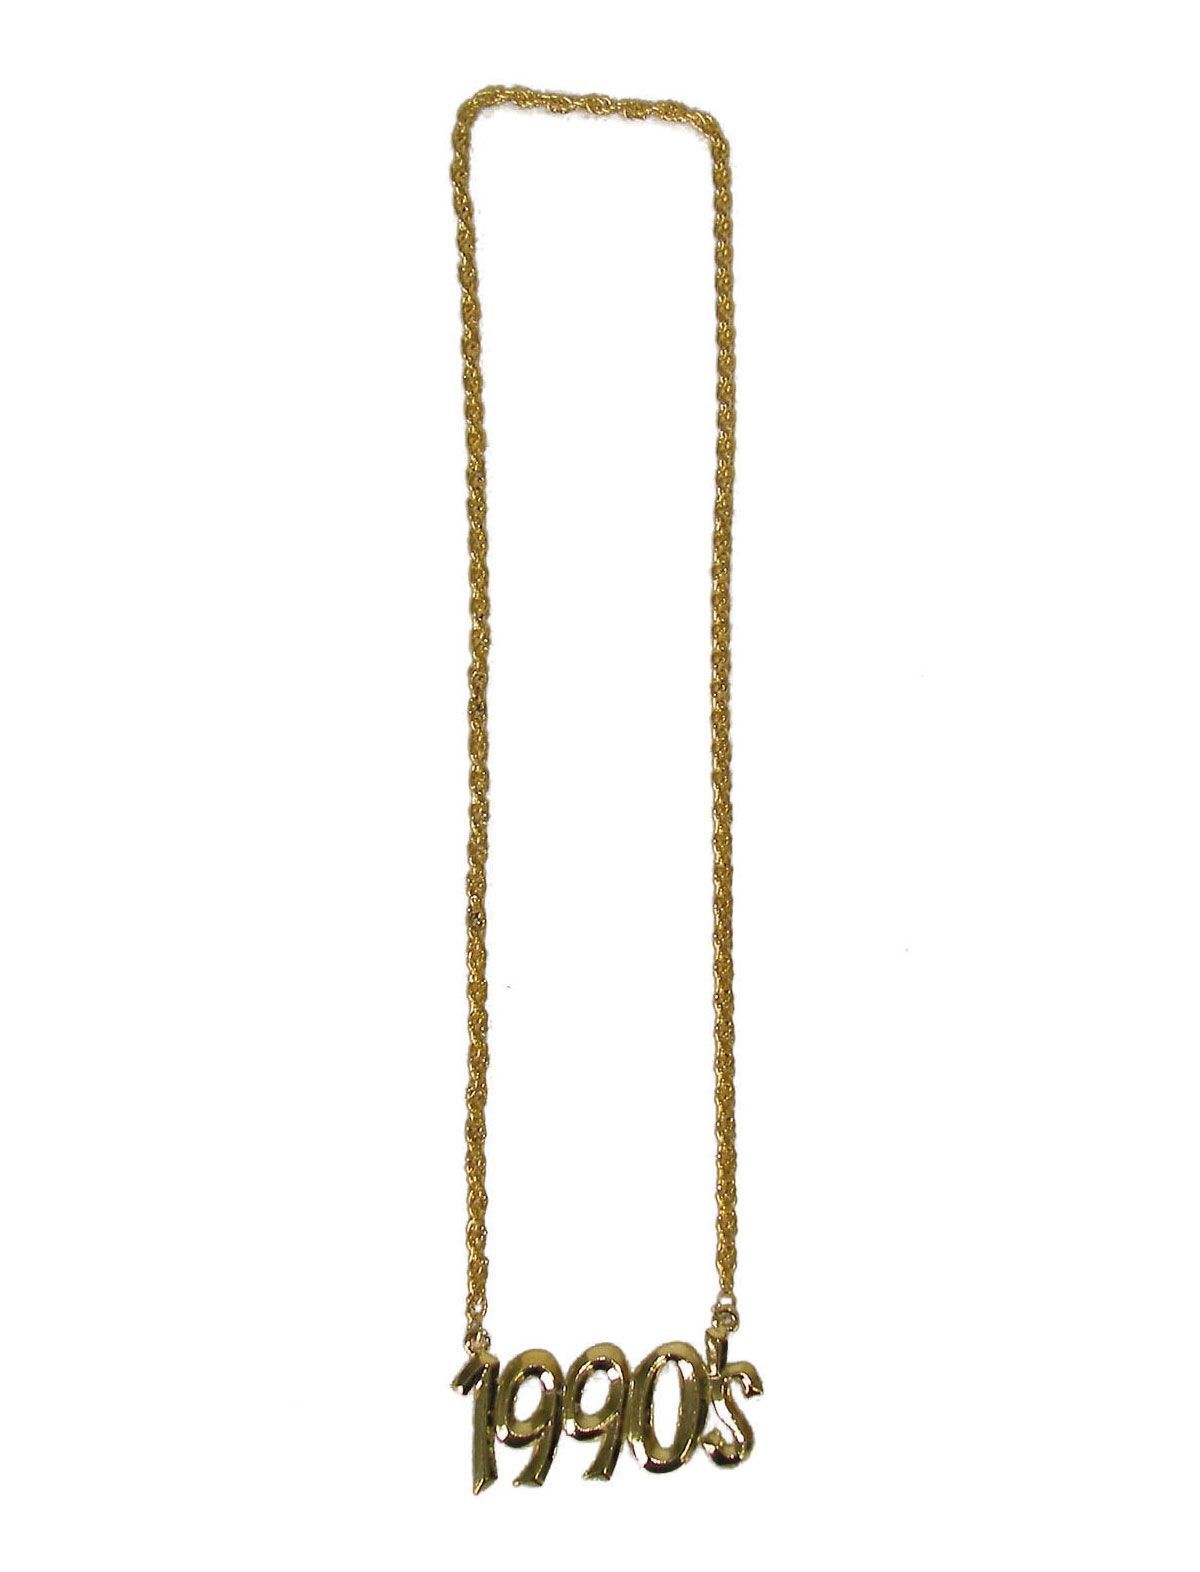 Necklace 1990S Gold